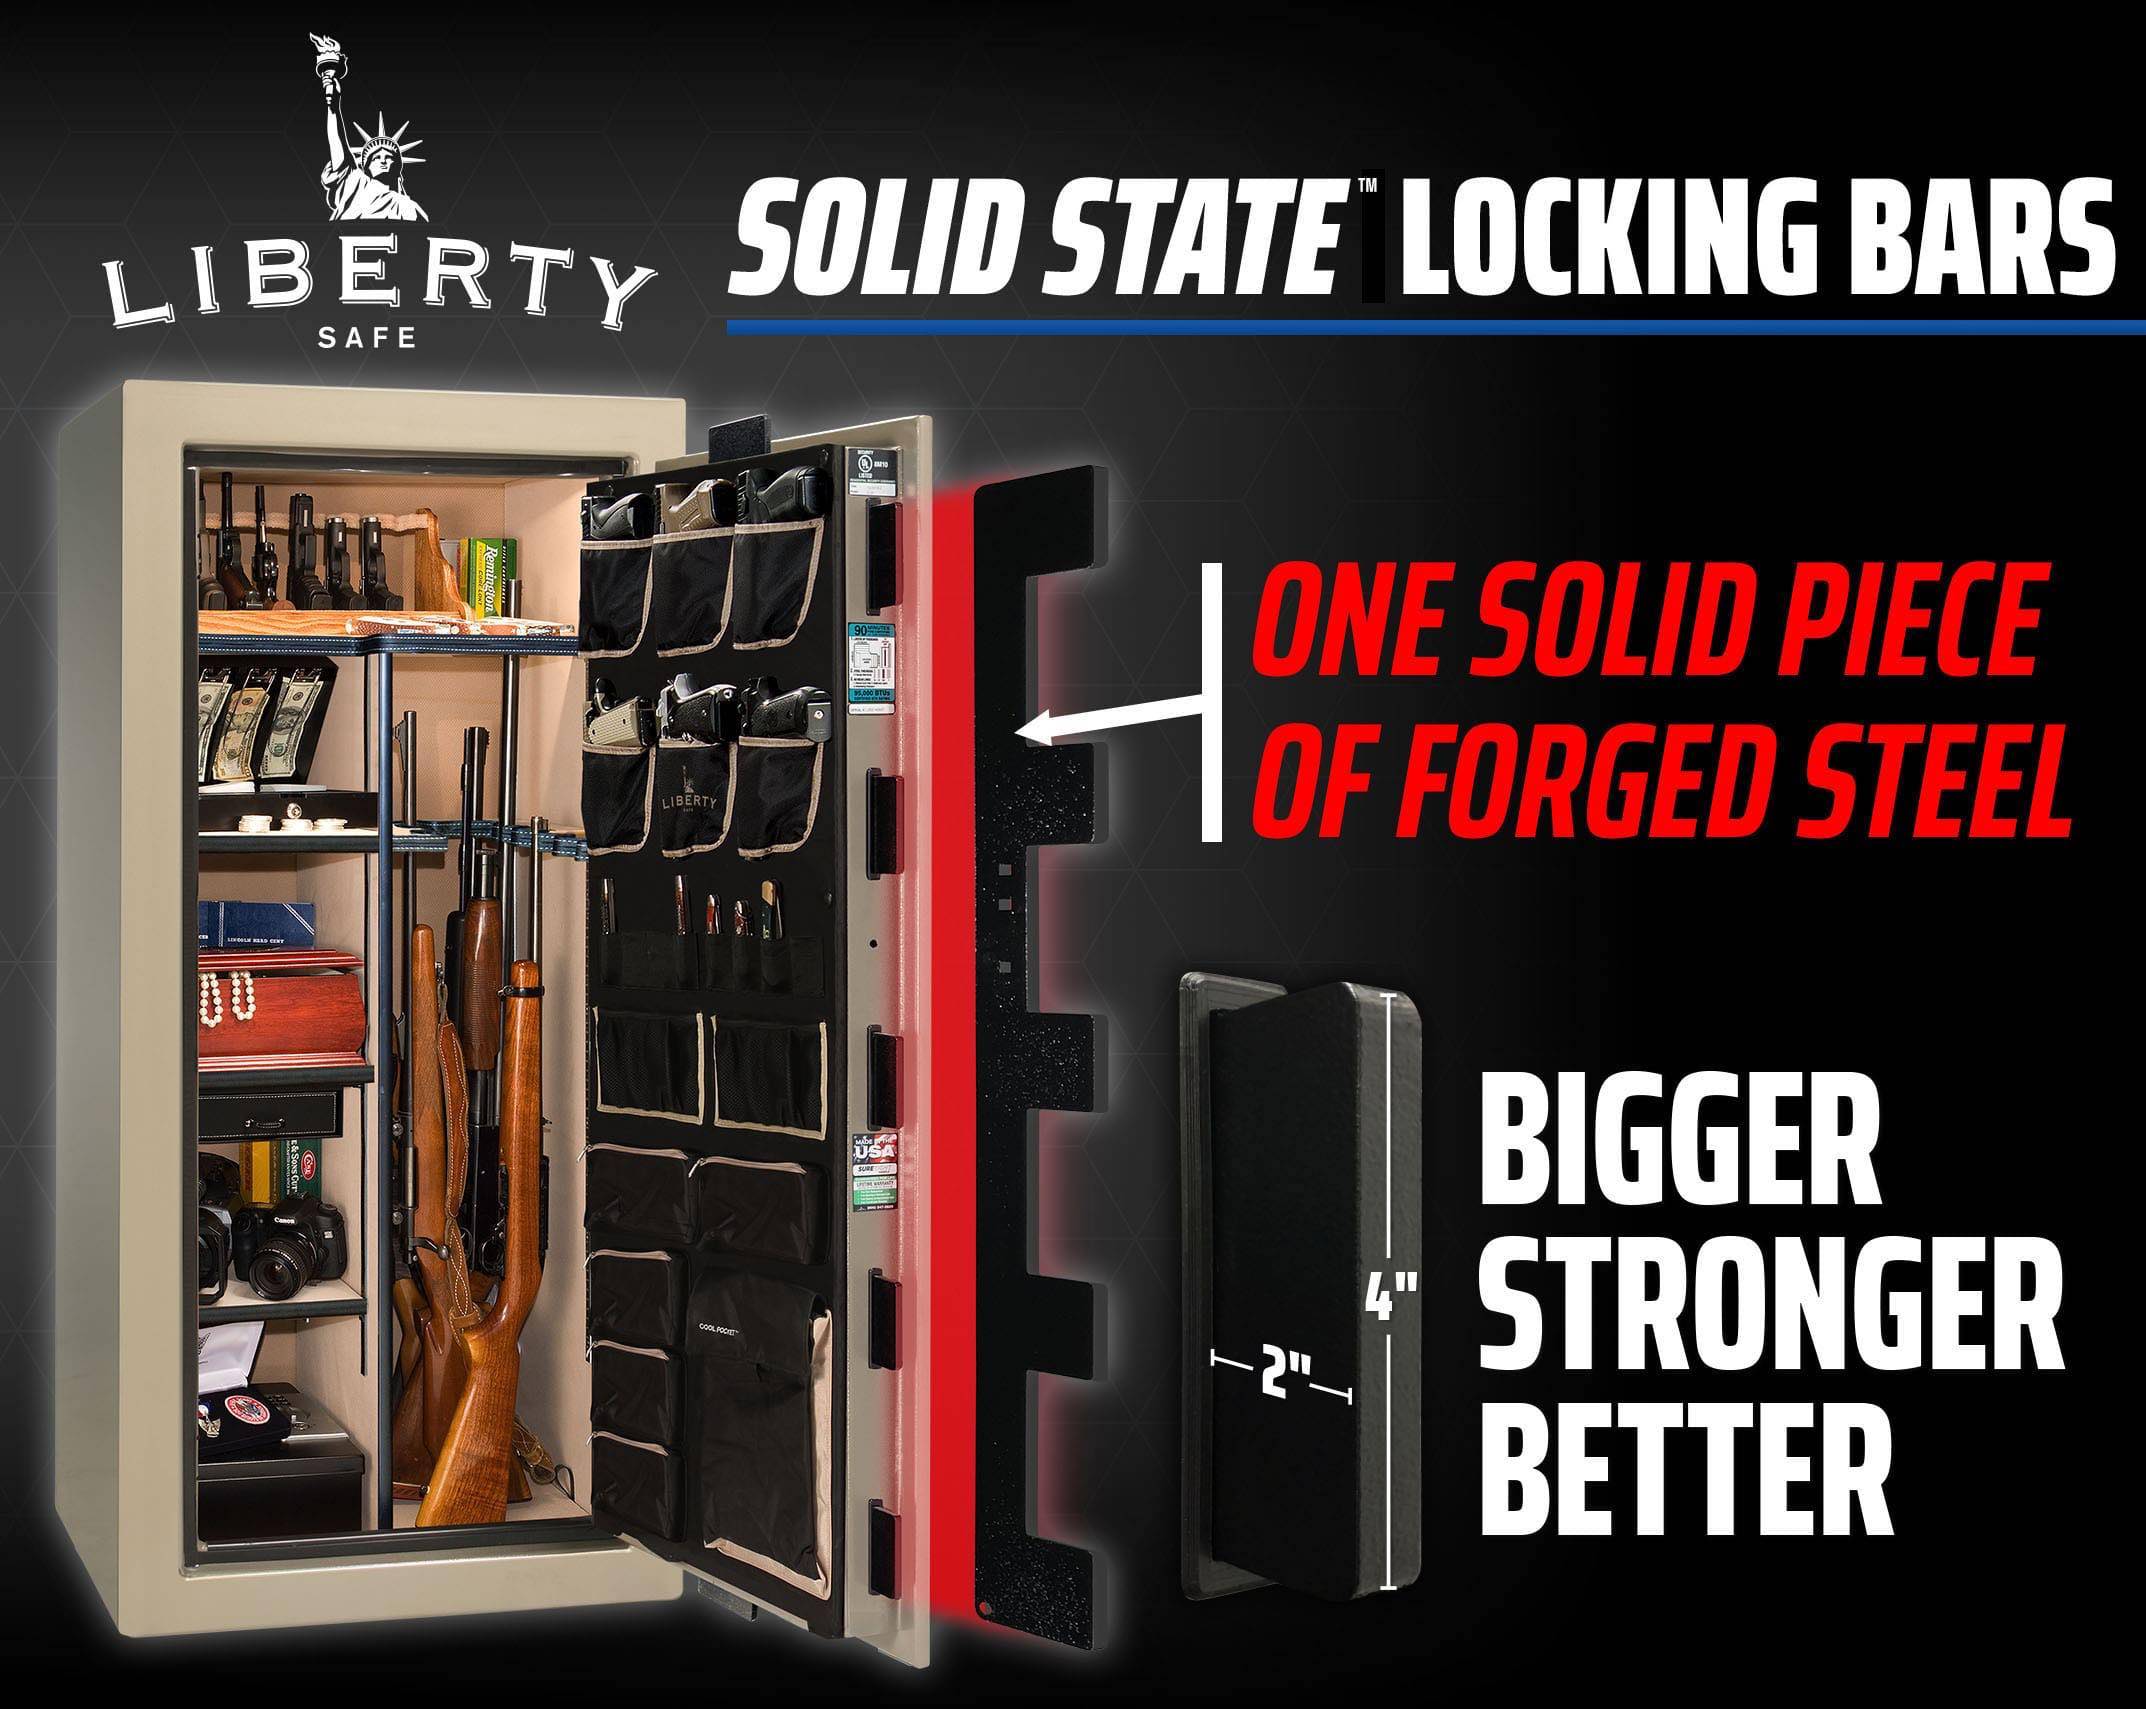 Gun Safe Locking Bars Are One Solid Piece of Forged Steel